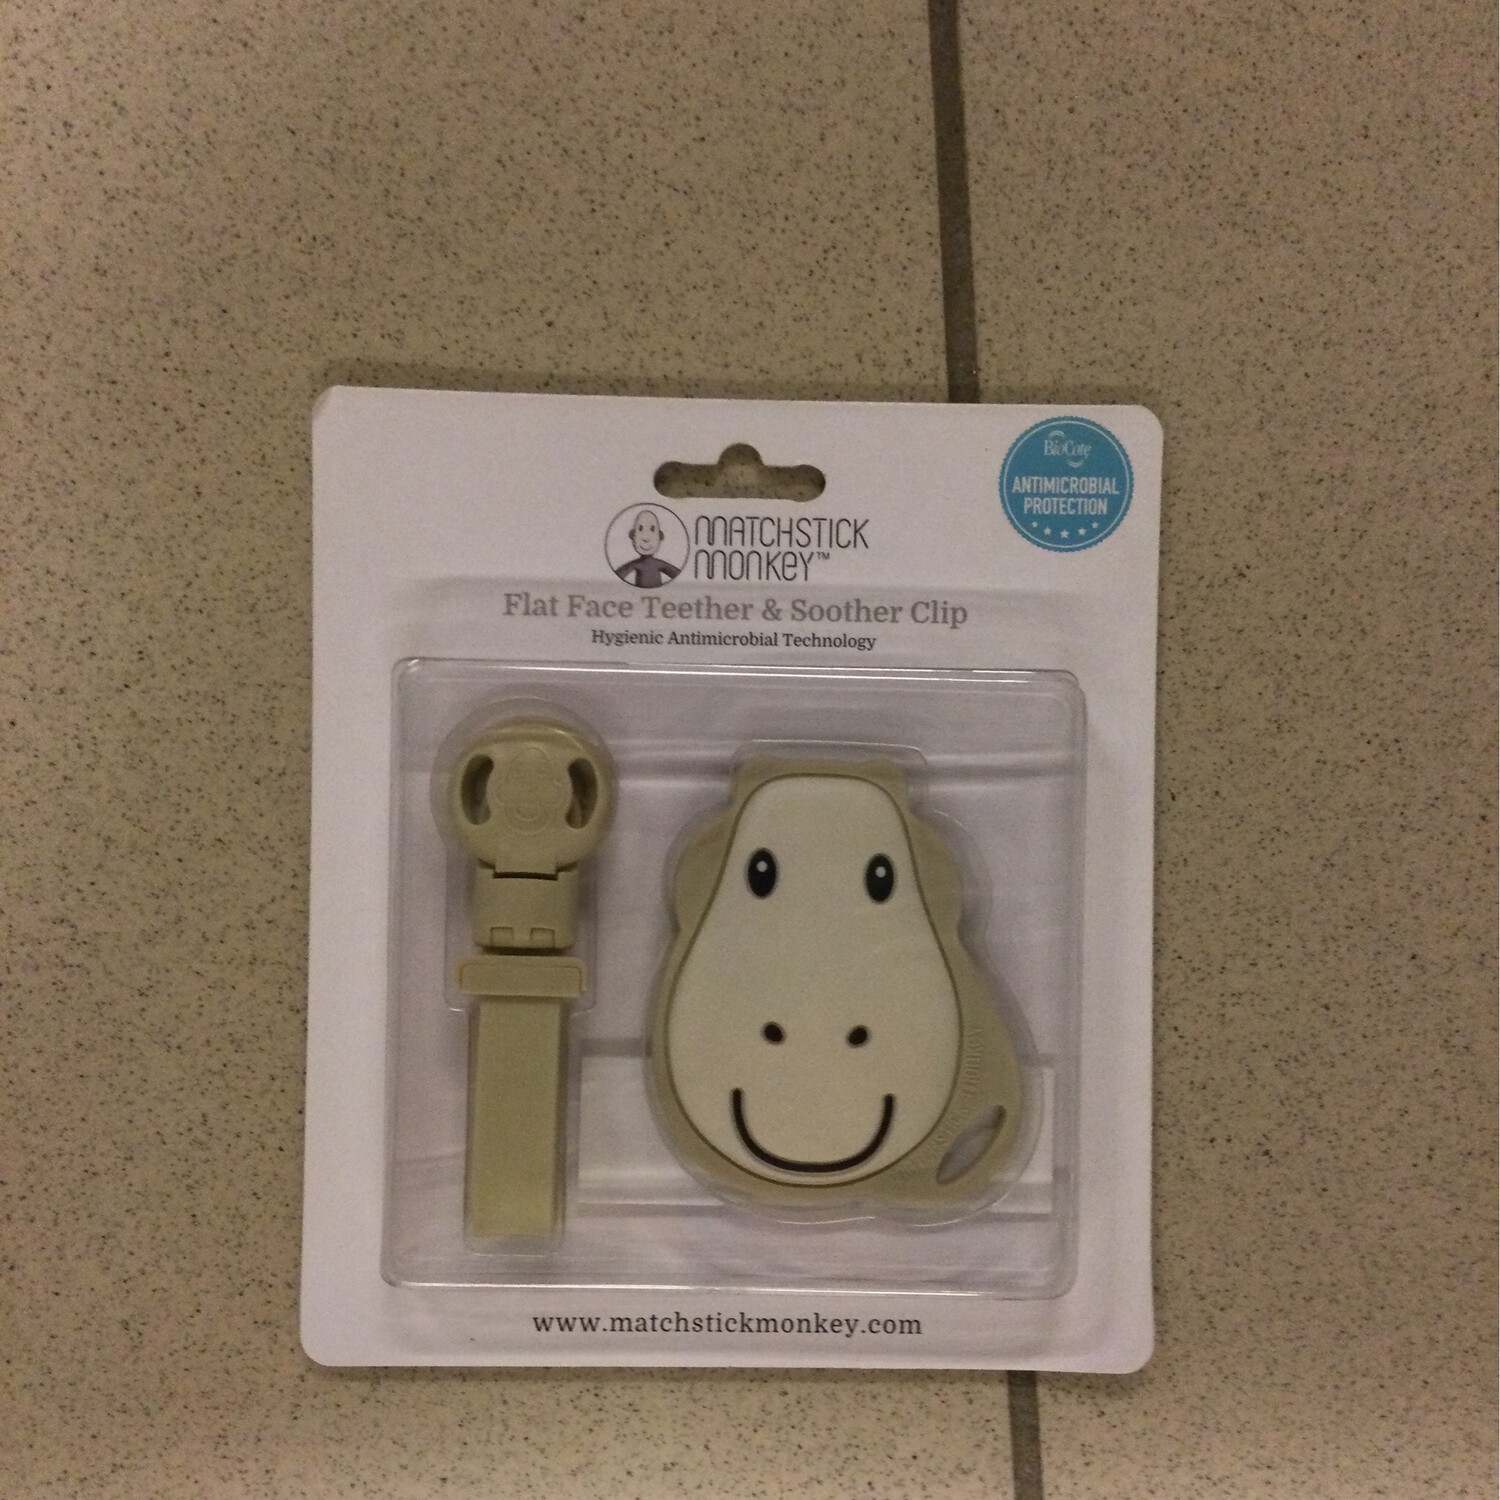 Matchstick Monkey Flat Face Teether & Soother Clip Beige